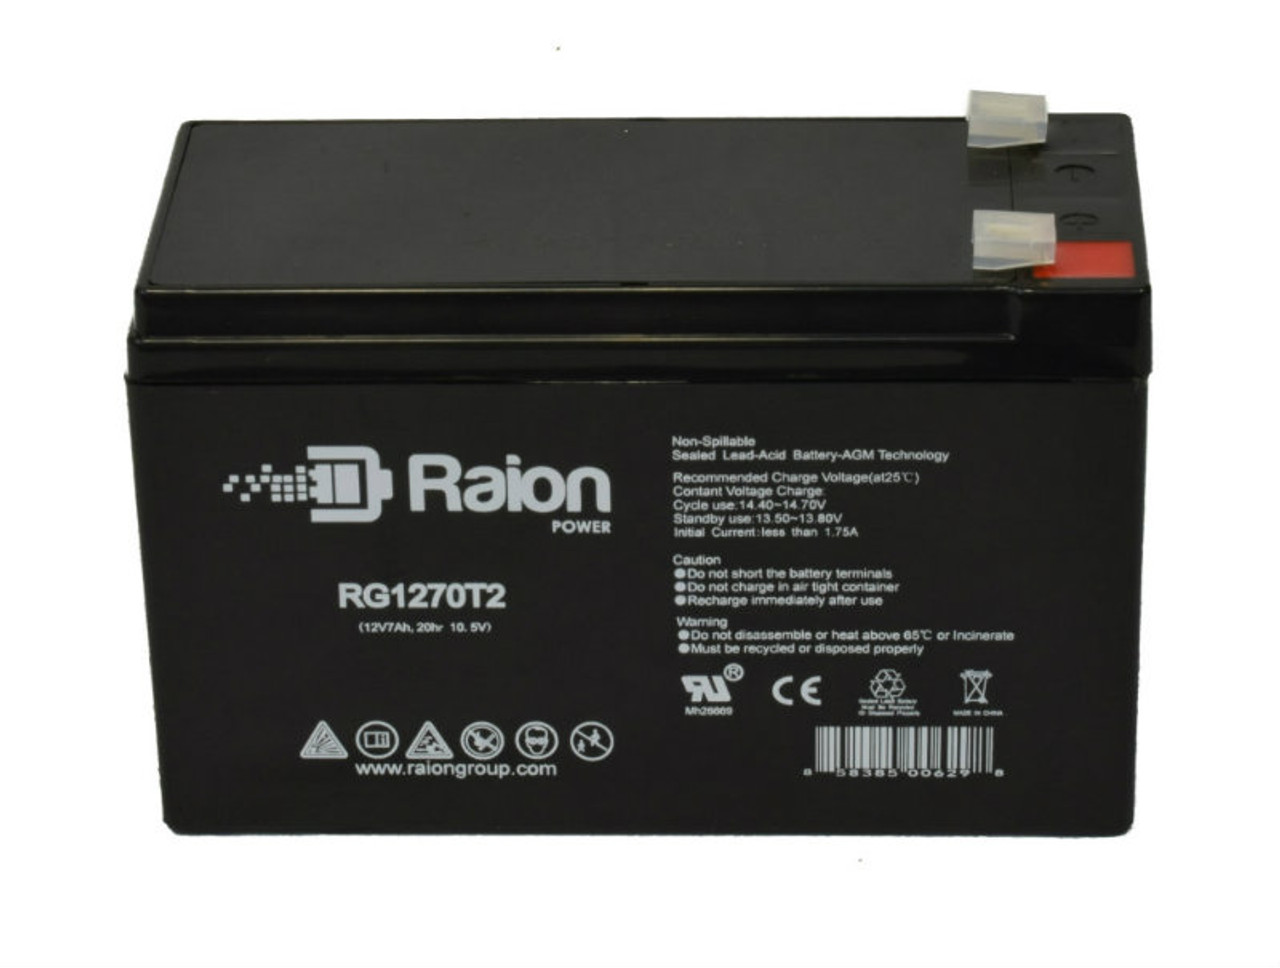 Raion Power RG1270T2 12V 7Ah Lead Acid Battery for Razor 13116214 E300S Electric Scooter Seated Gray